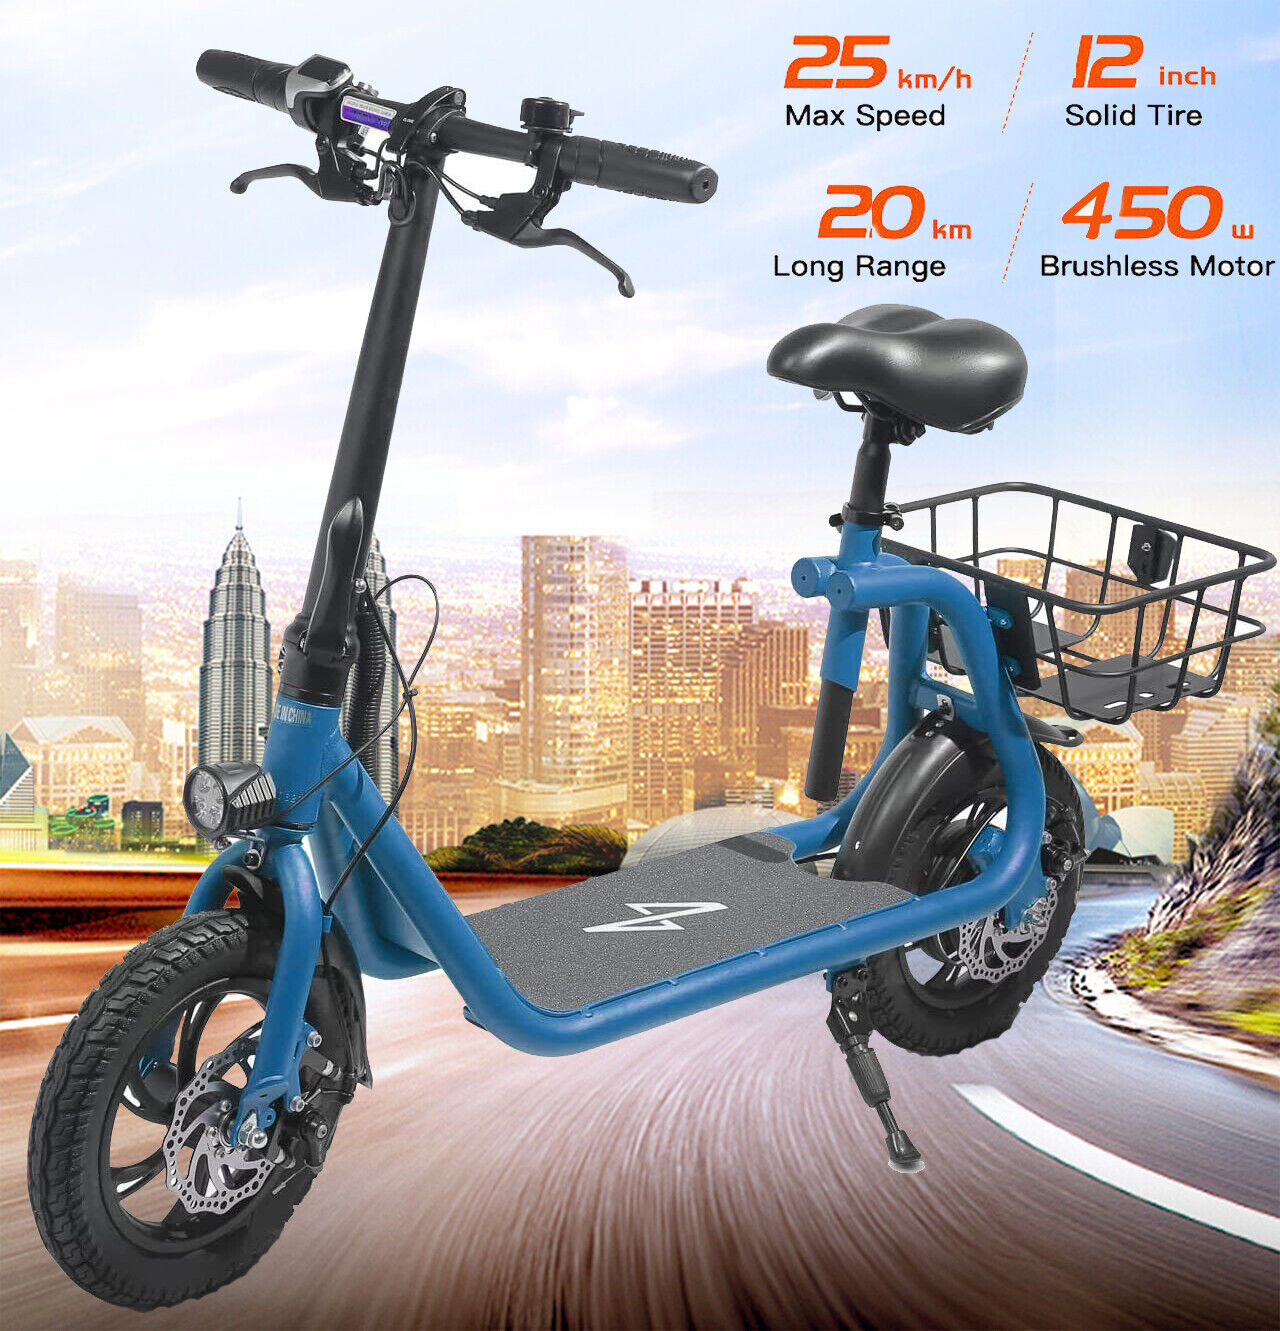 450W Sport Electric Scooter Commuter with Seat Folding Adult Ebike Bicycle Blue